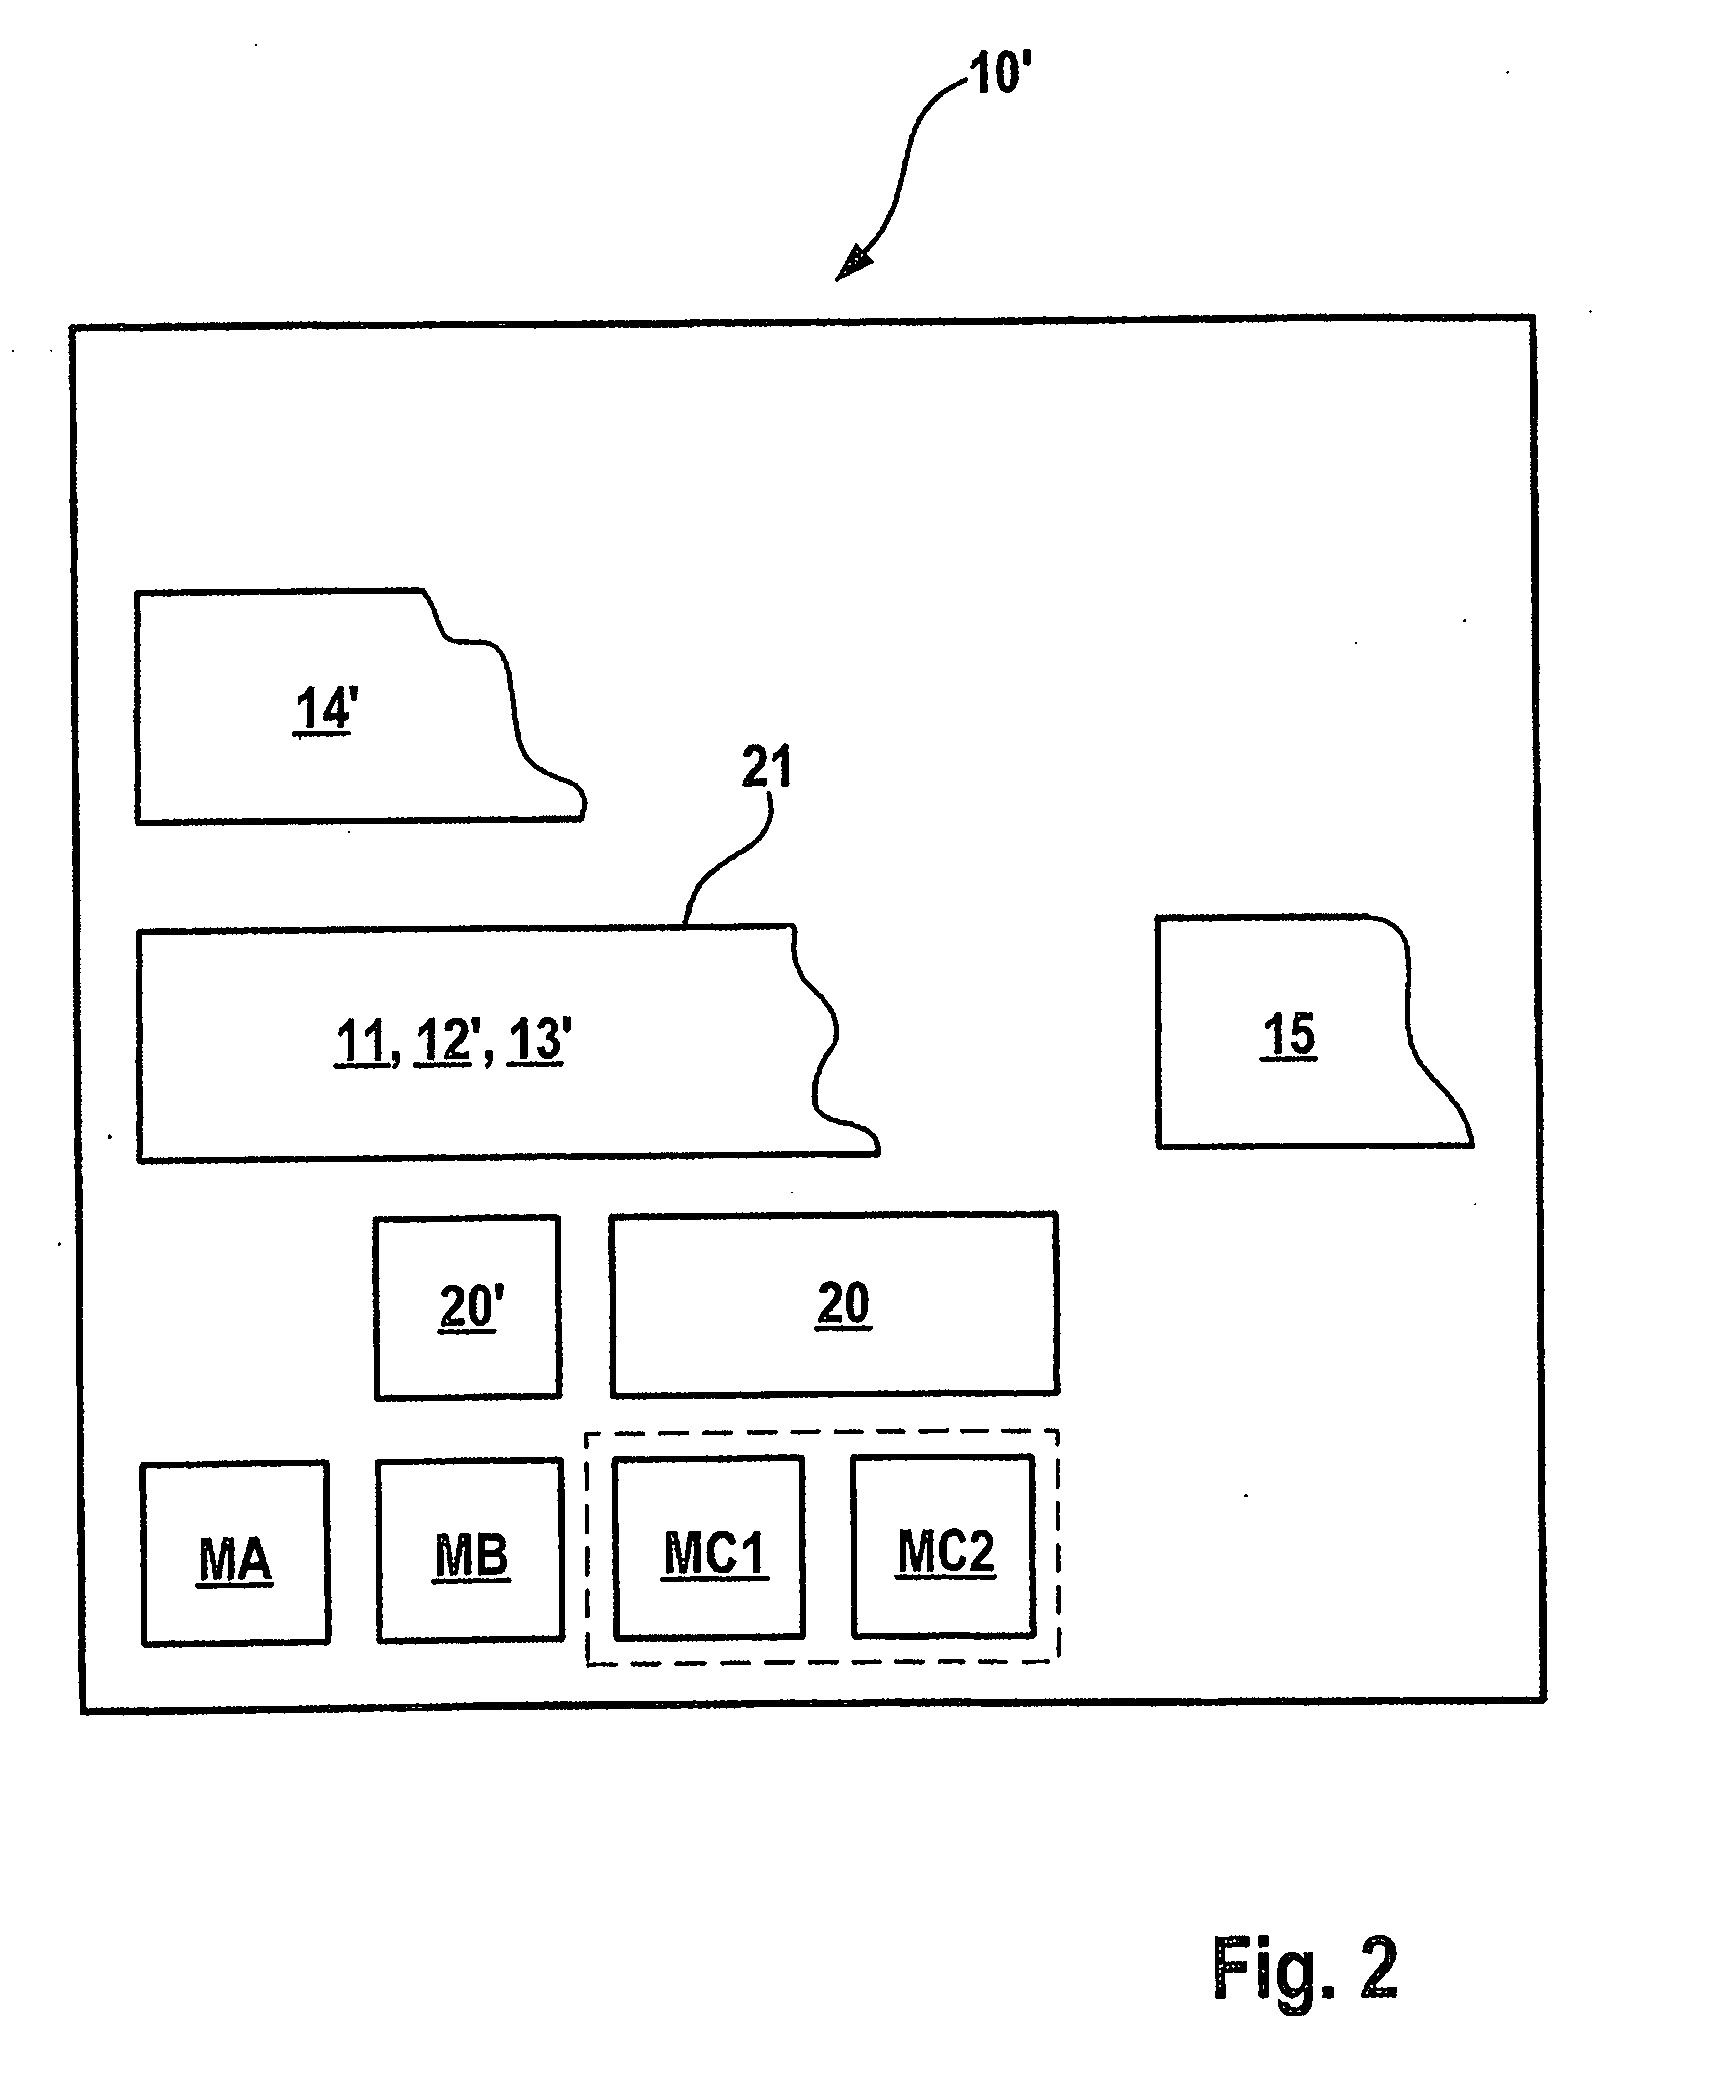 Emulation system and method for a no longer available microcontroller